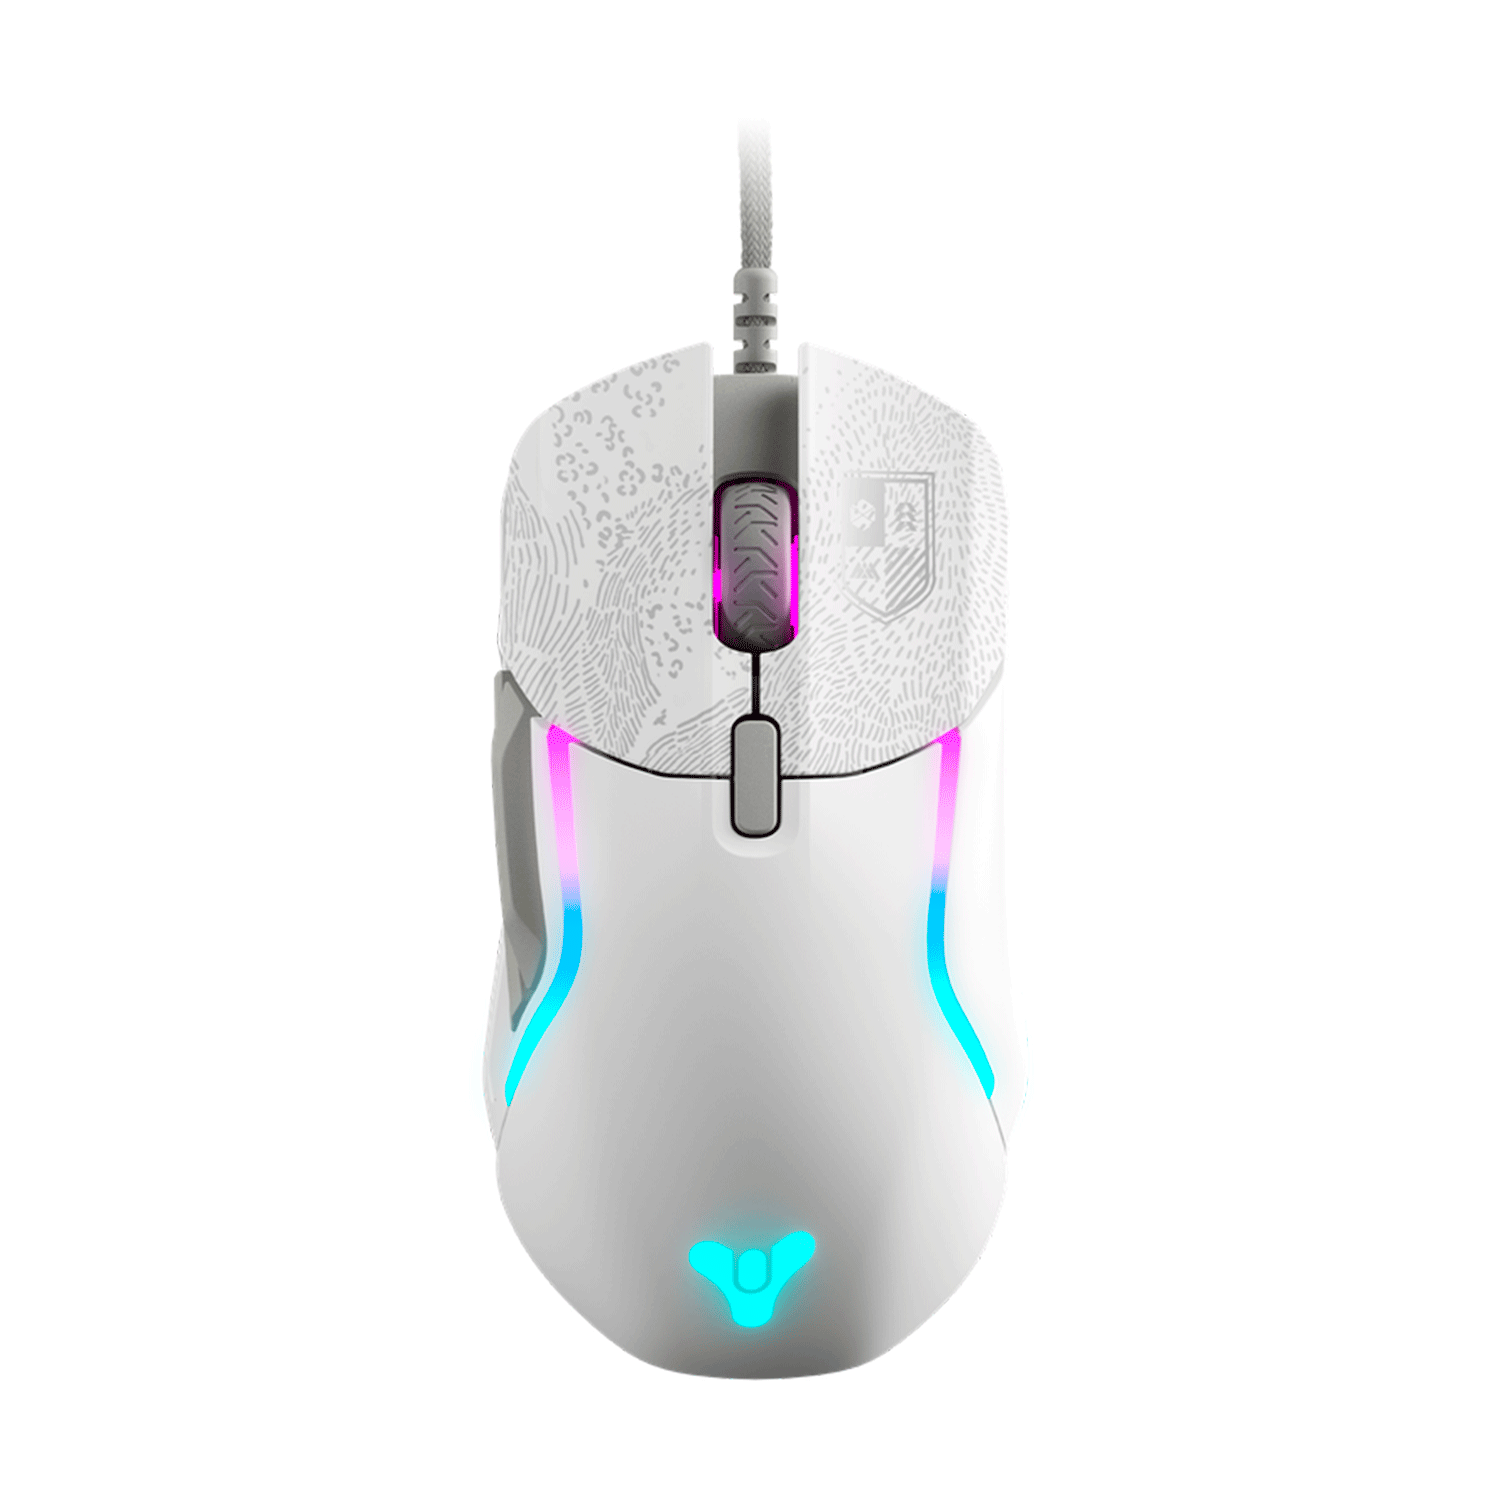 Mouse Steelseries Rival 5 Destiny Edition (62552)